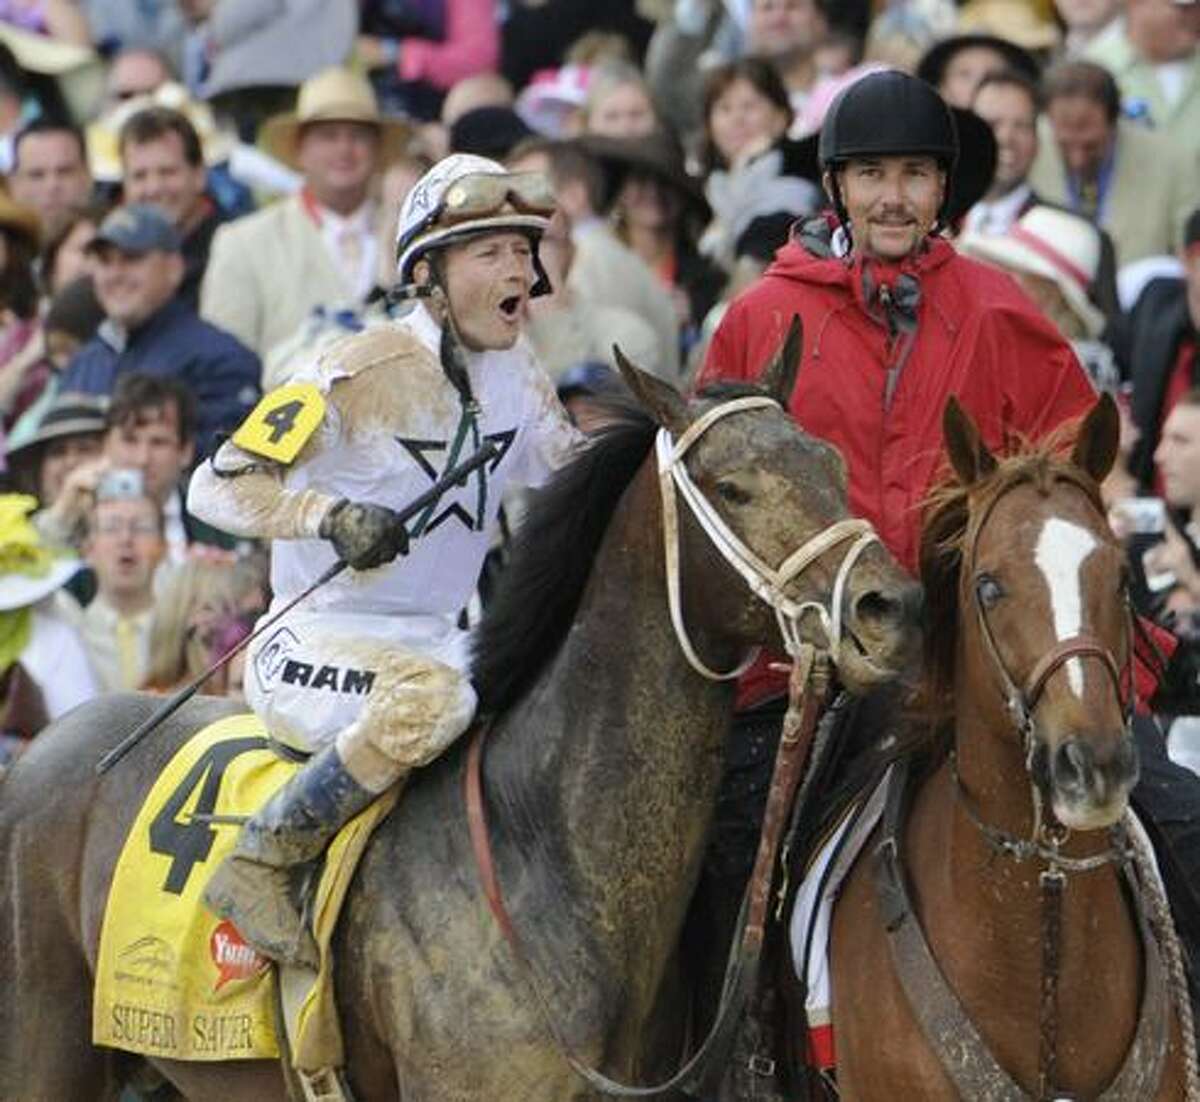 Jockey Calvin Borel wins his third Kentucky Derby in the last four years on Super Saver at Churchill Downs in Louisville, Kentucky May 1, 2010. (Skip Dickstein / Times Union)